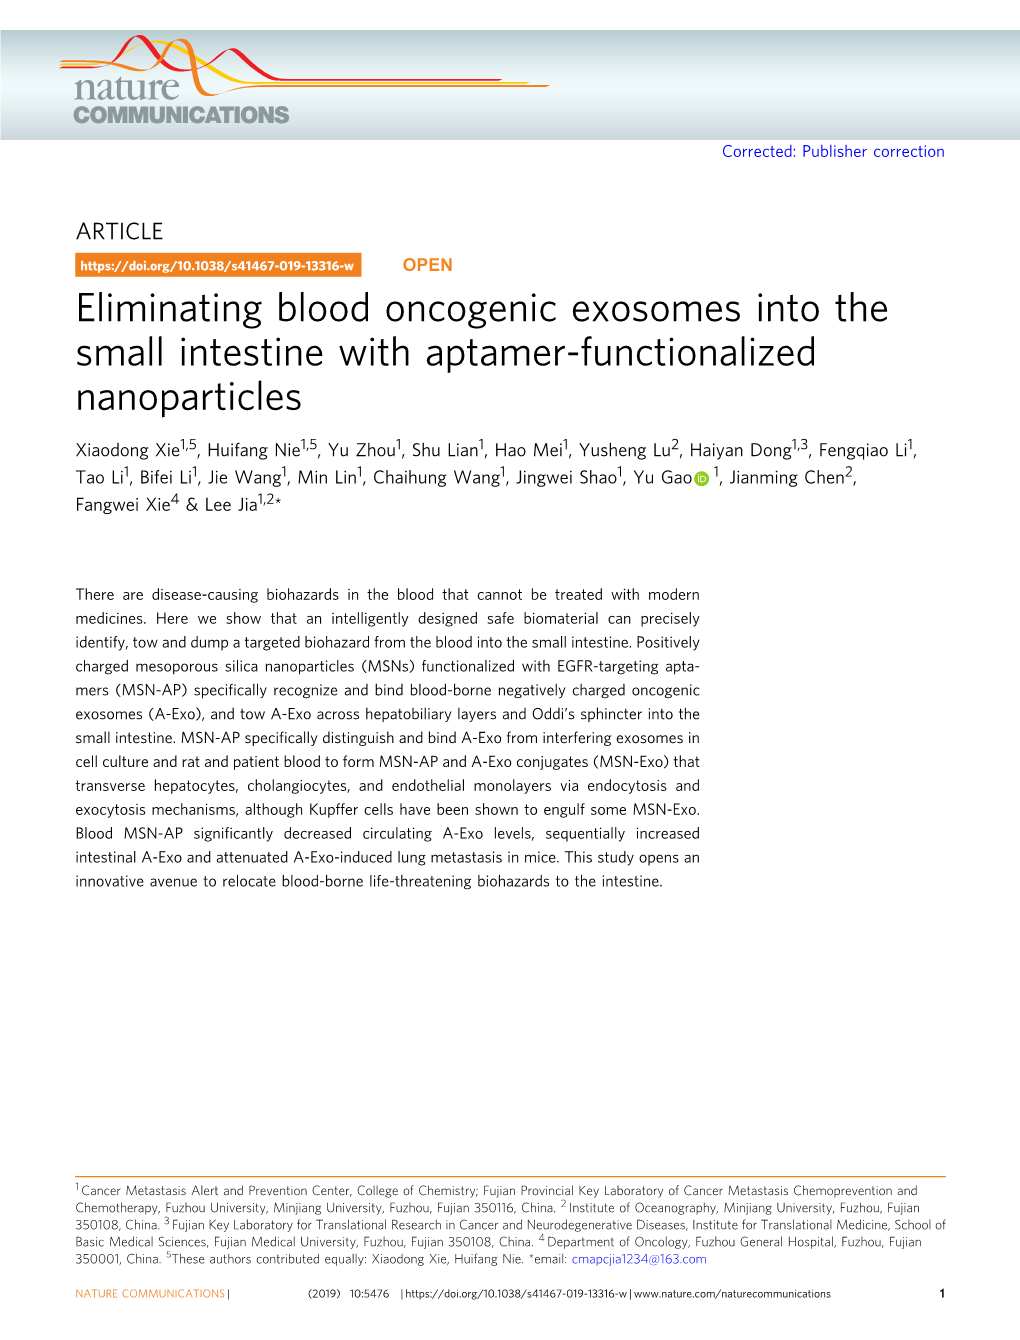 Eliminating Blood Oncogenic Exosomes Into the Small Intestine with Aptamer-Functionalized Nanoparticles